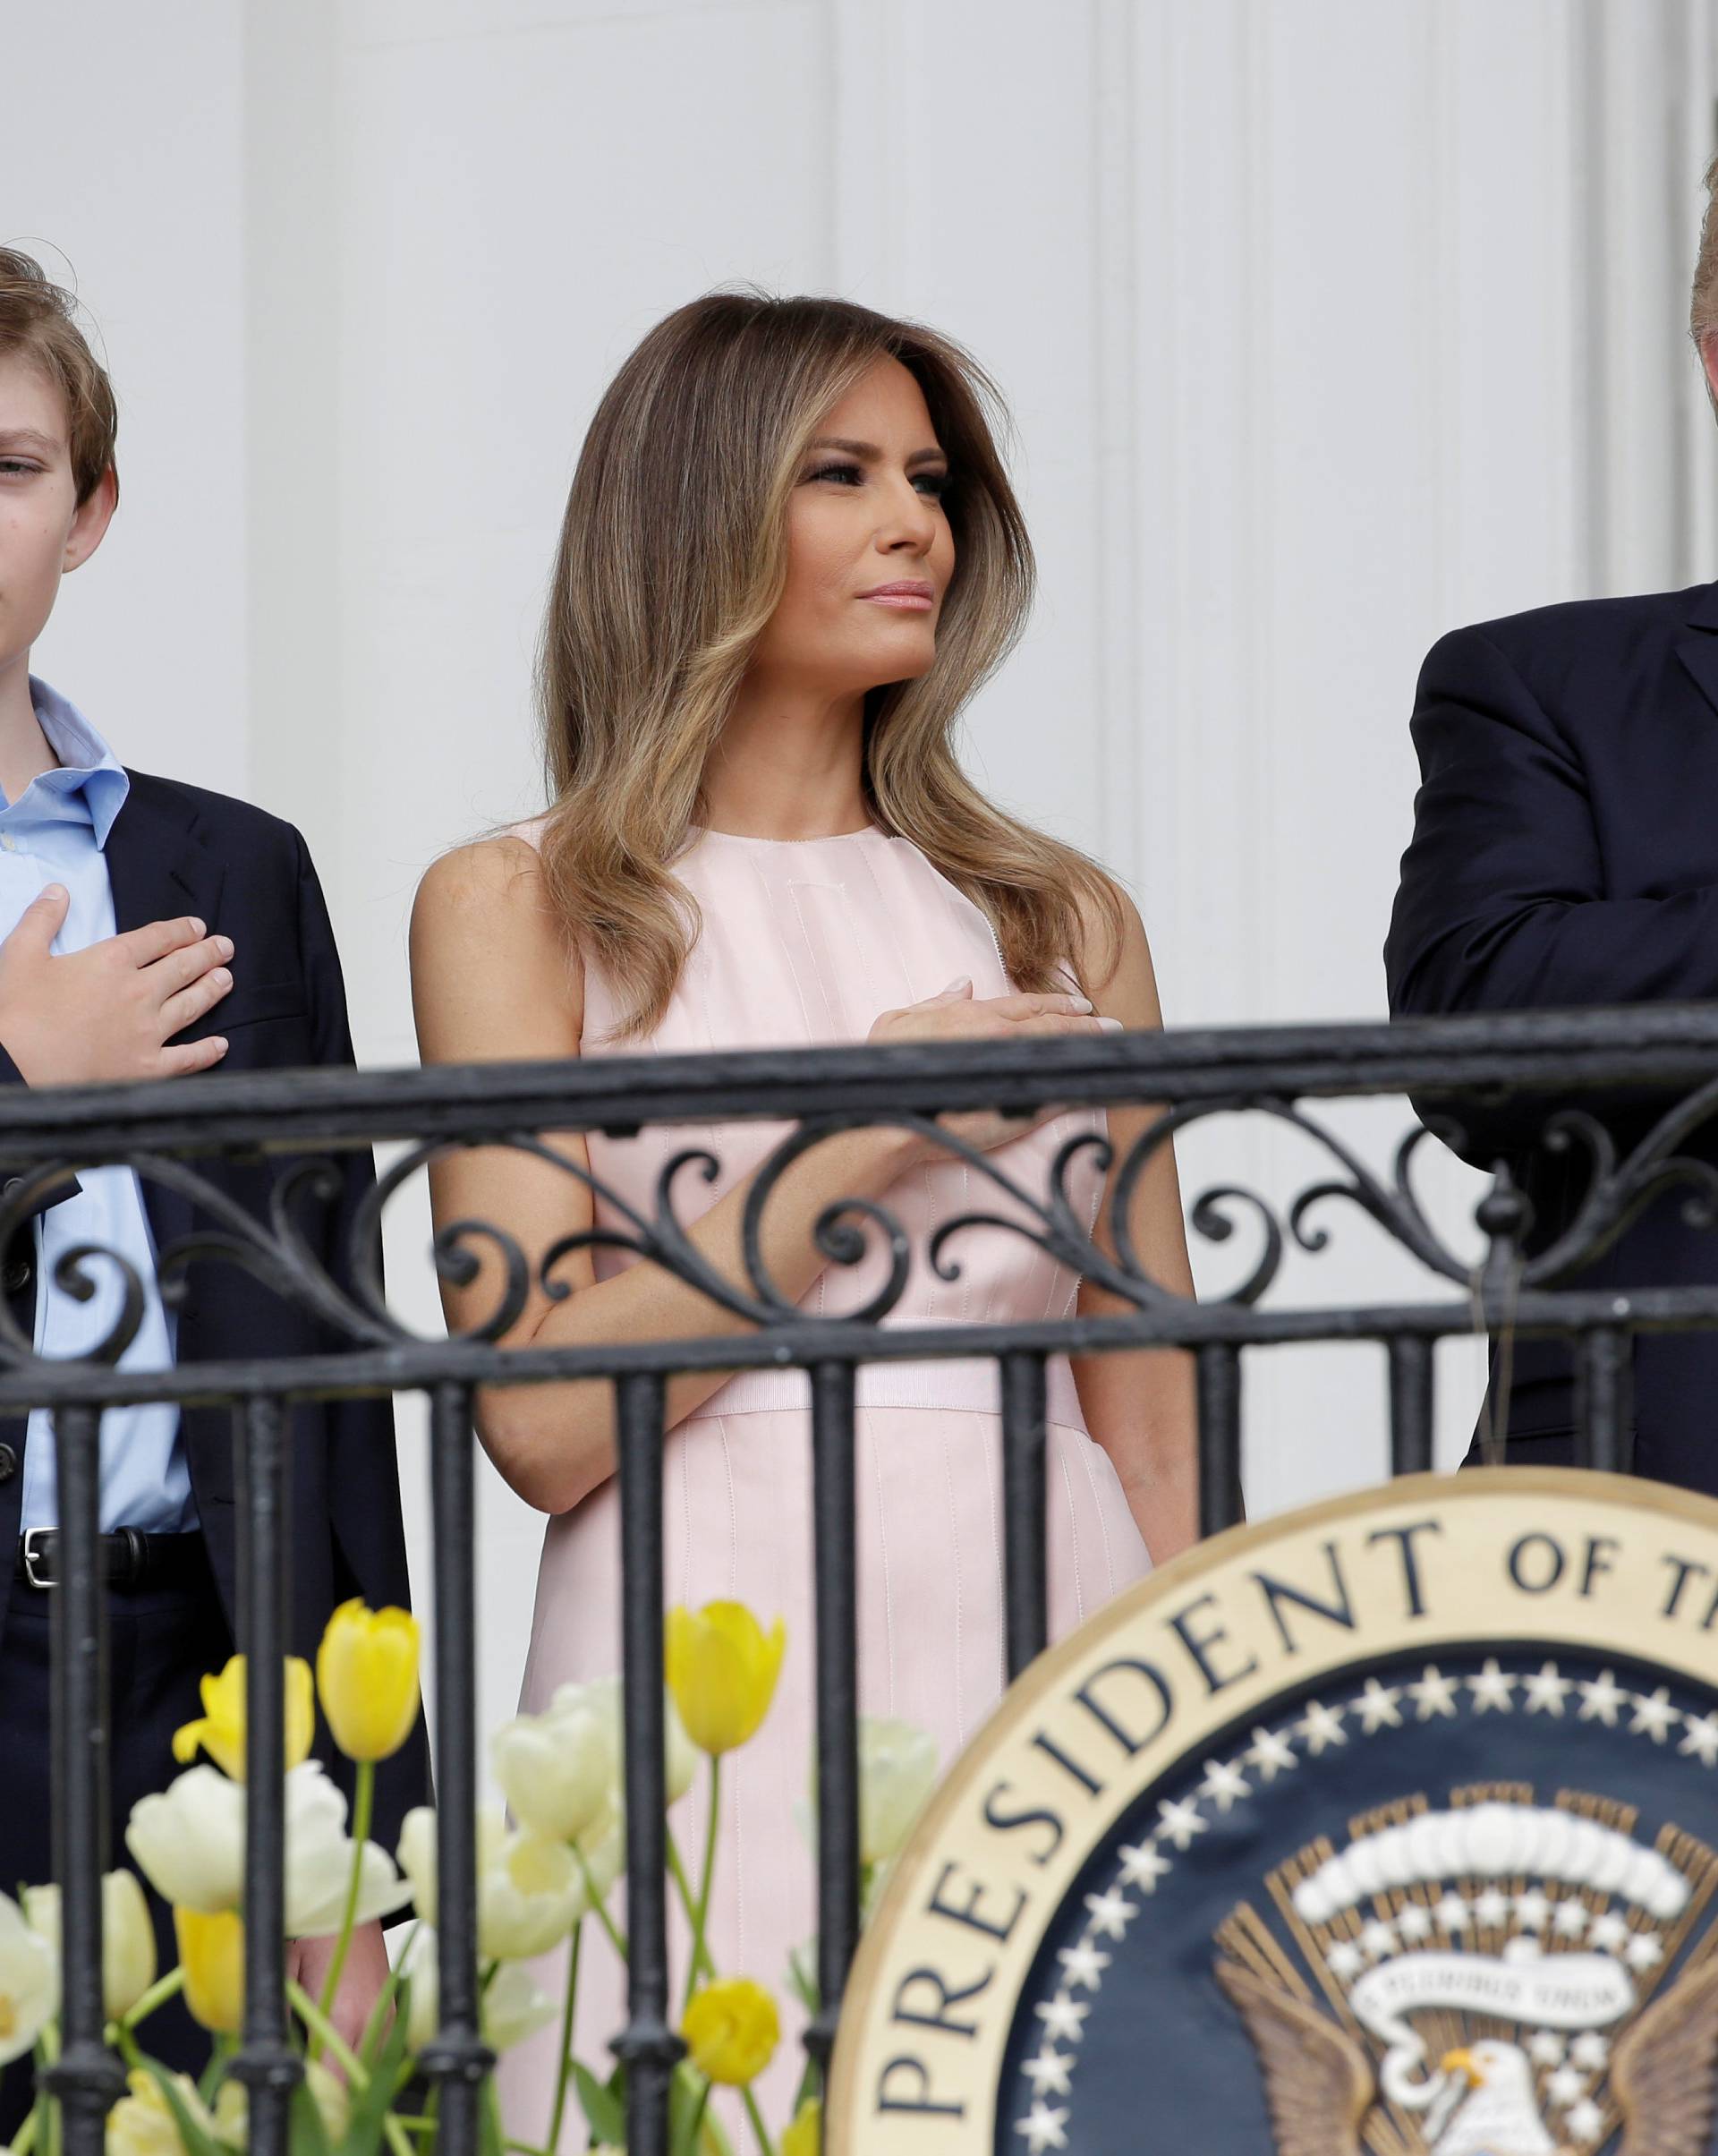 U.S. President Donald Trump, U.S. first lady Melania Trump and the their son Barron stand during the National Anthem at the 139th annual White House Easter Egg Roll on the South Lawn of the White House in Washington